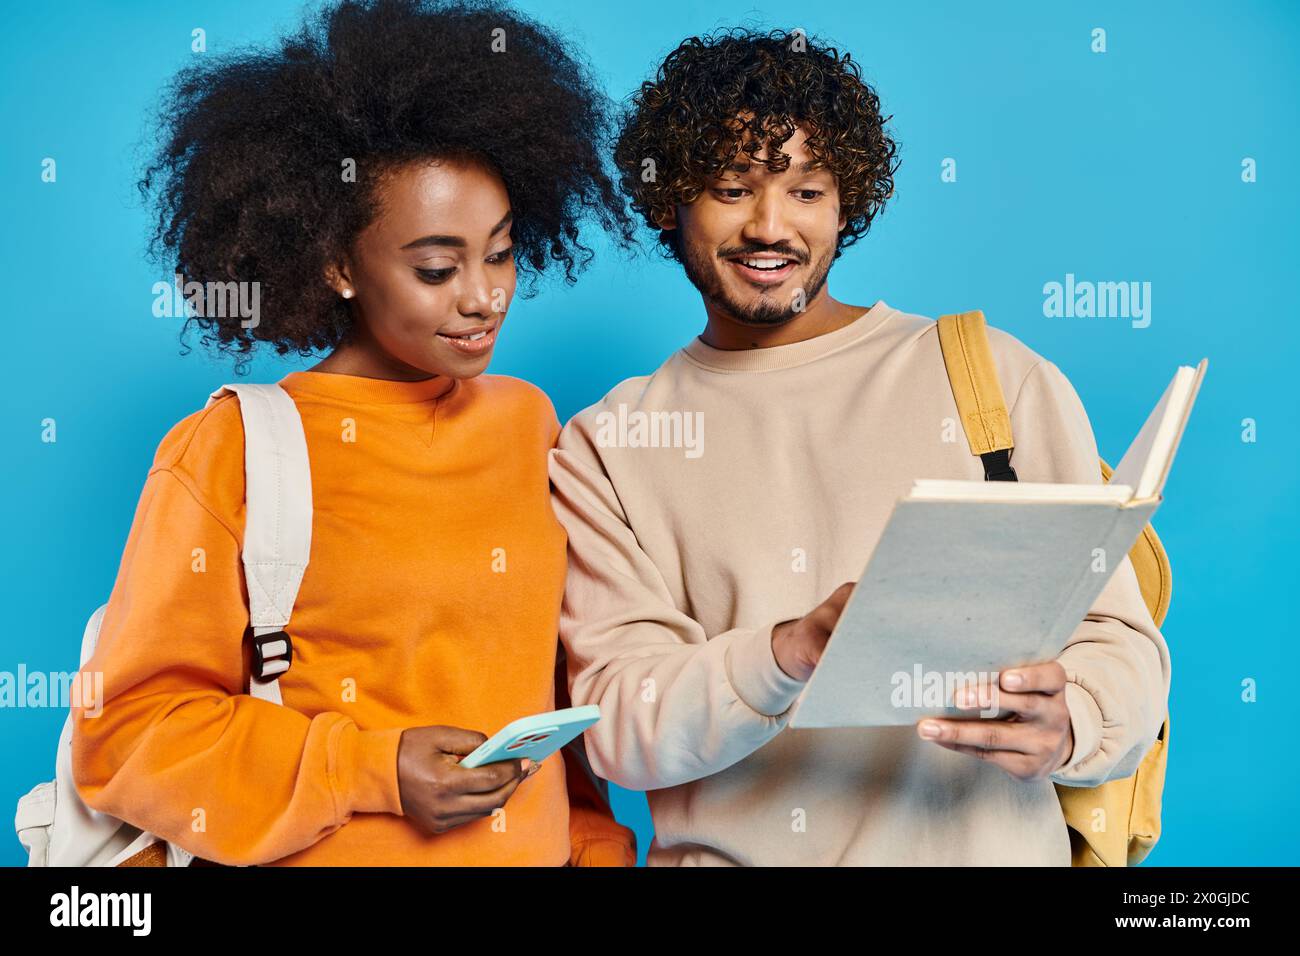 An interracial man and woman standing, examining a piece of paper together in a studio setting on a blue backdrop. Stock Photo